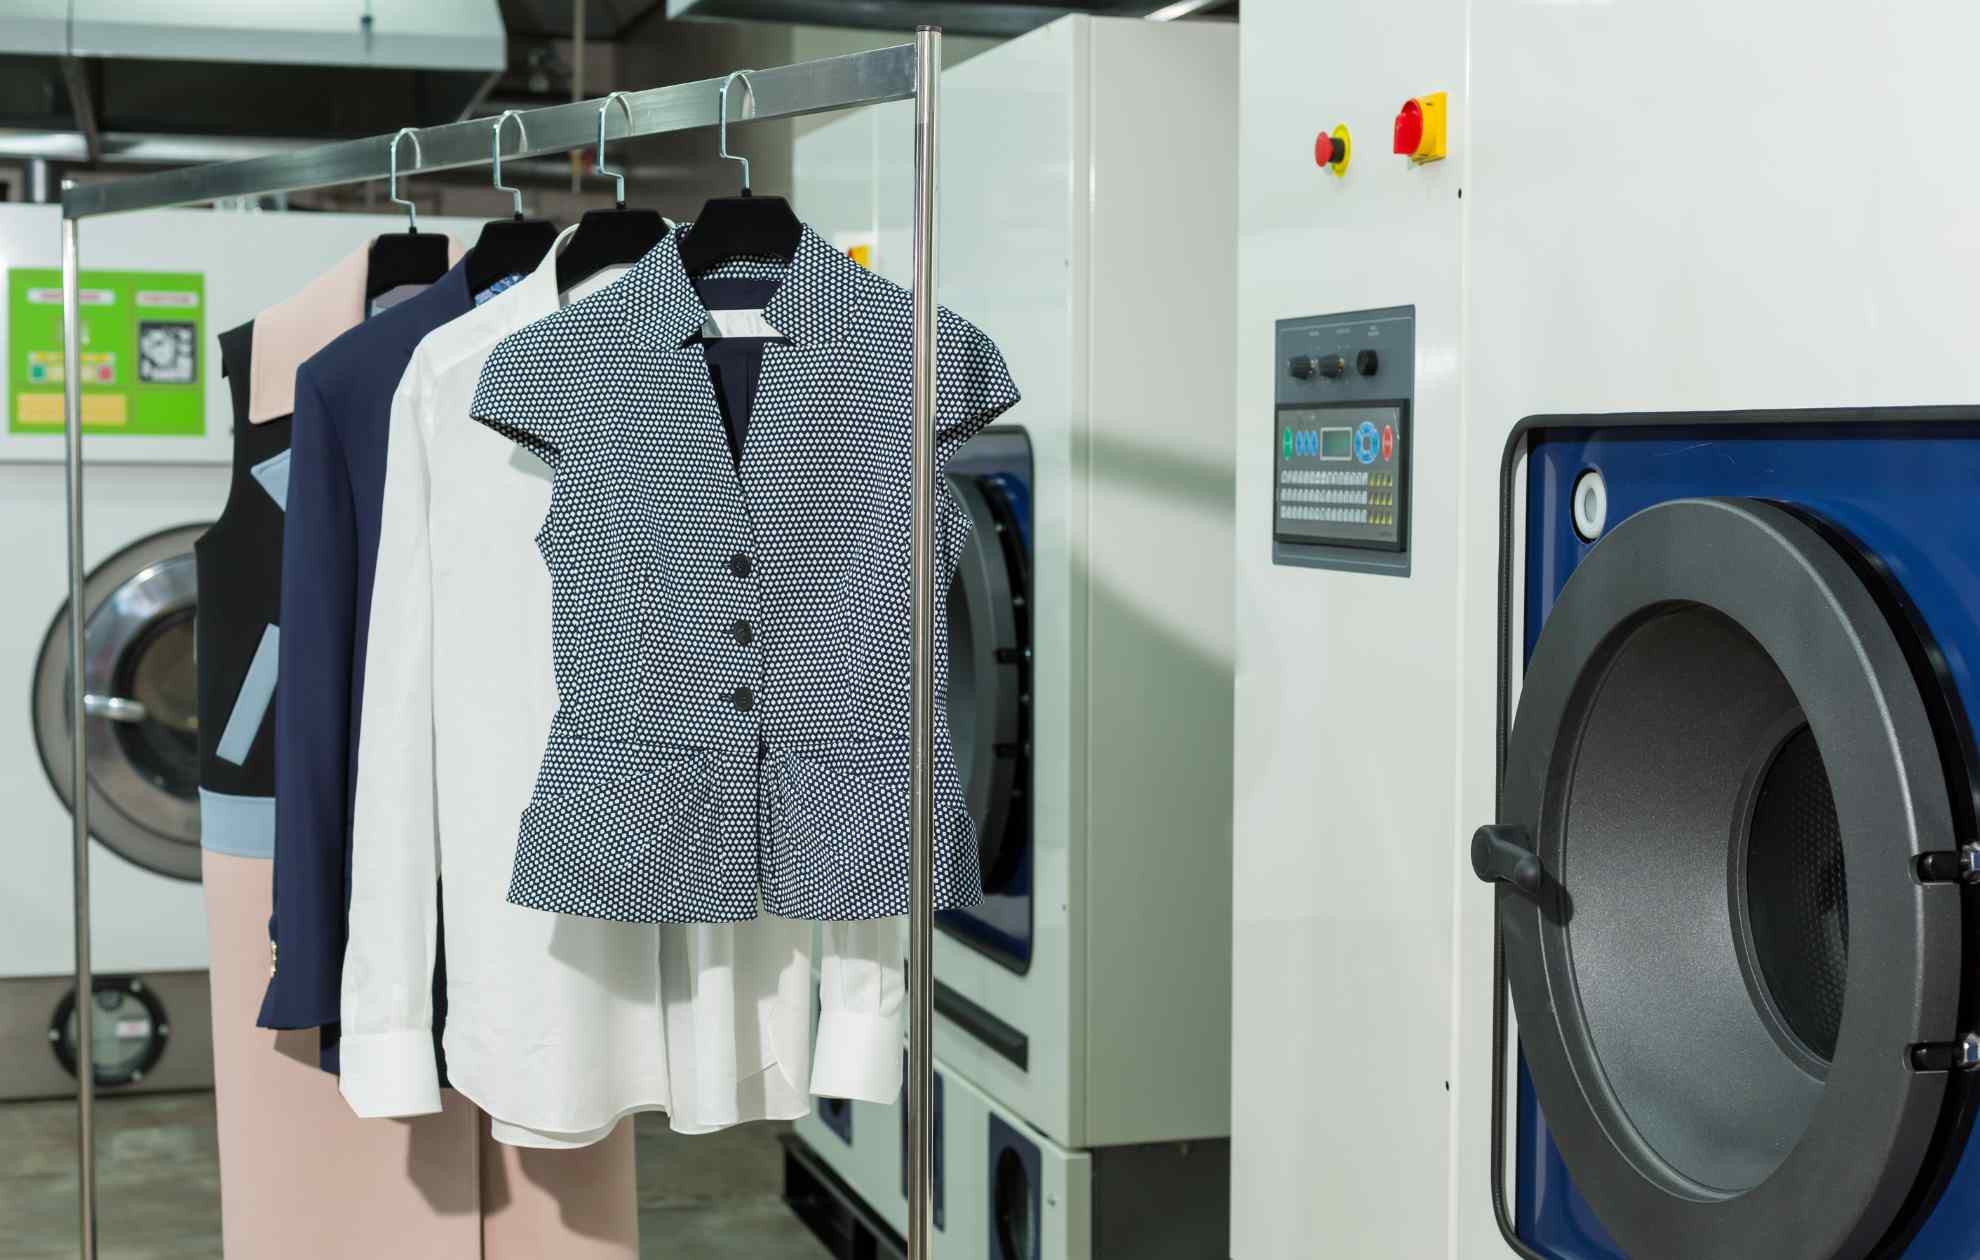 A laundry room with clothes hanging on racks, offering dry cleaning services.